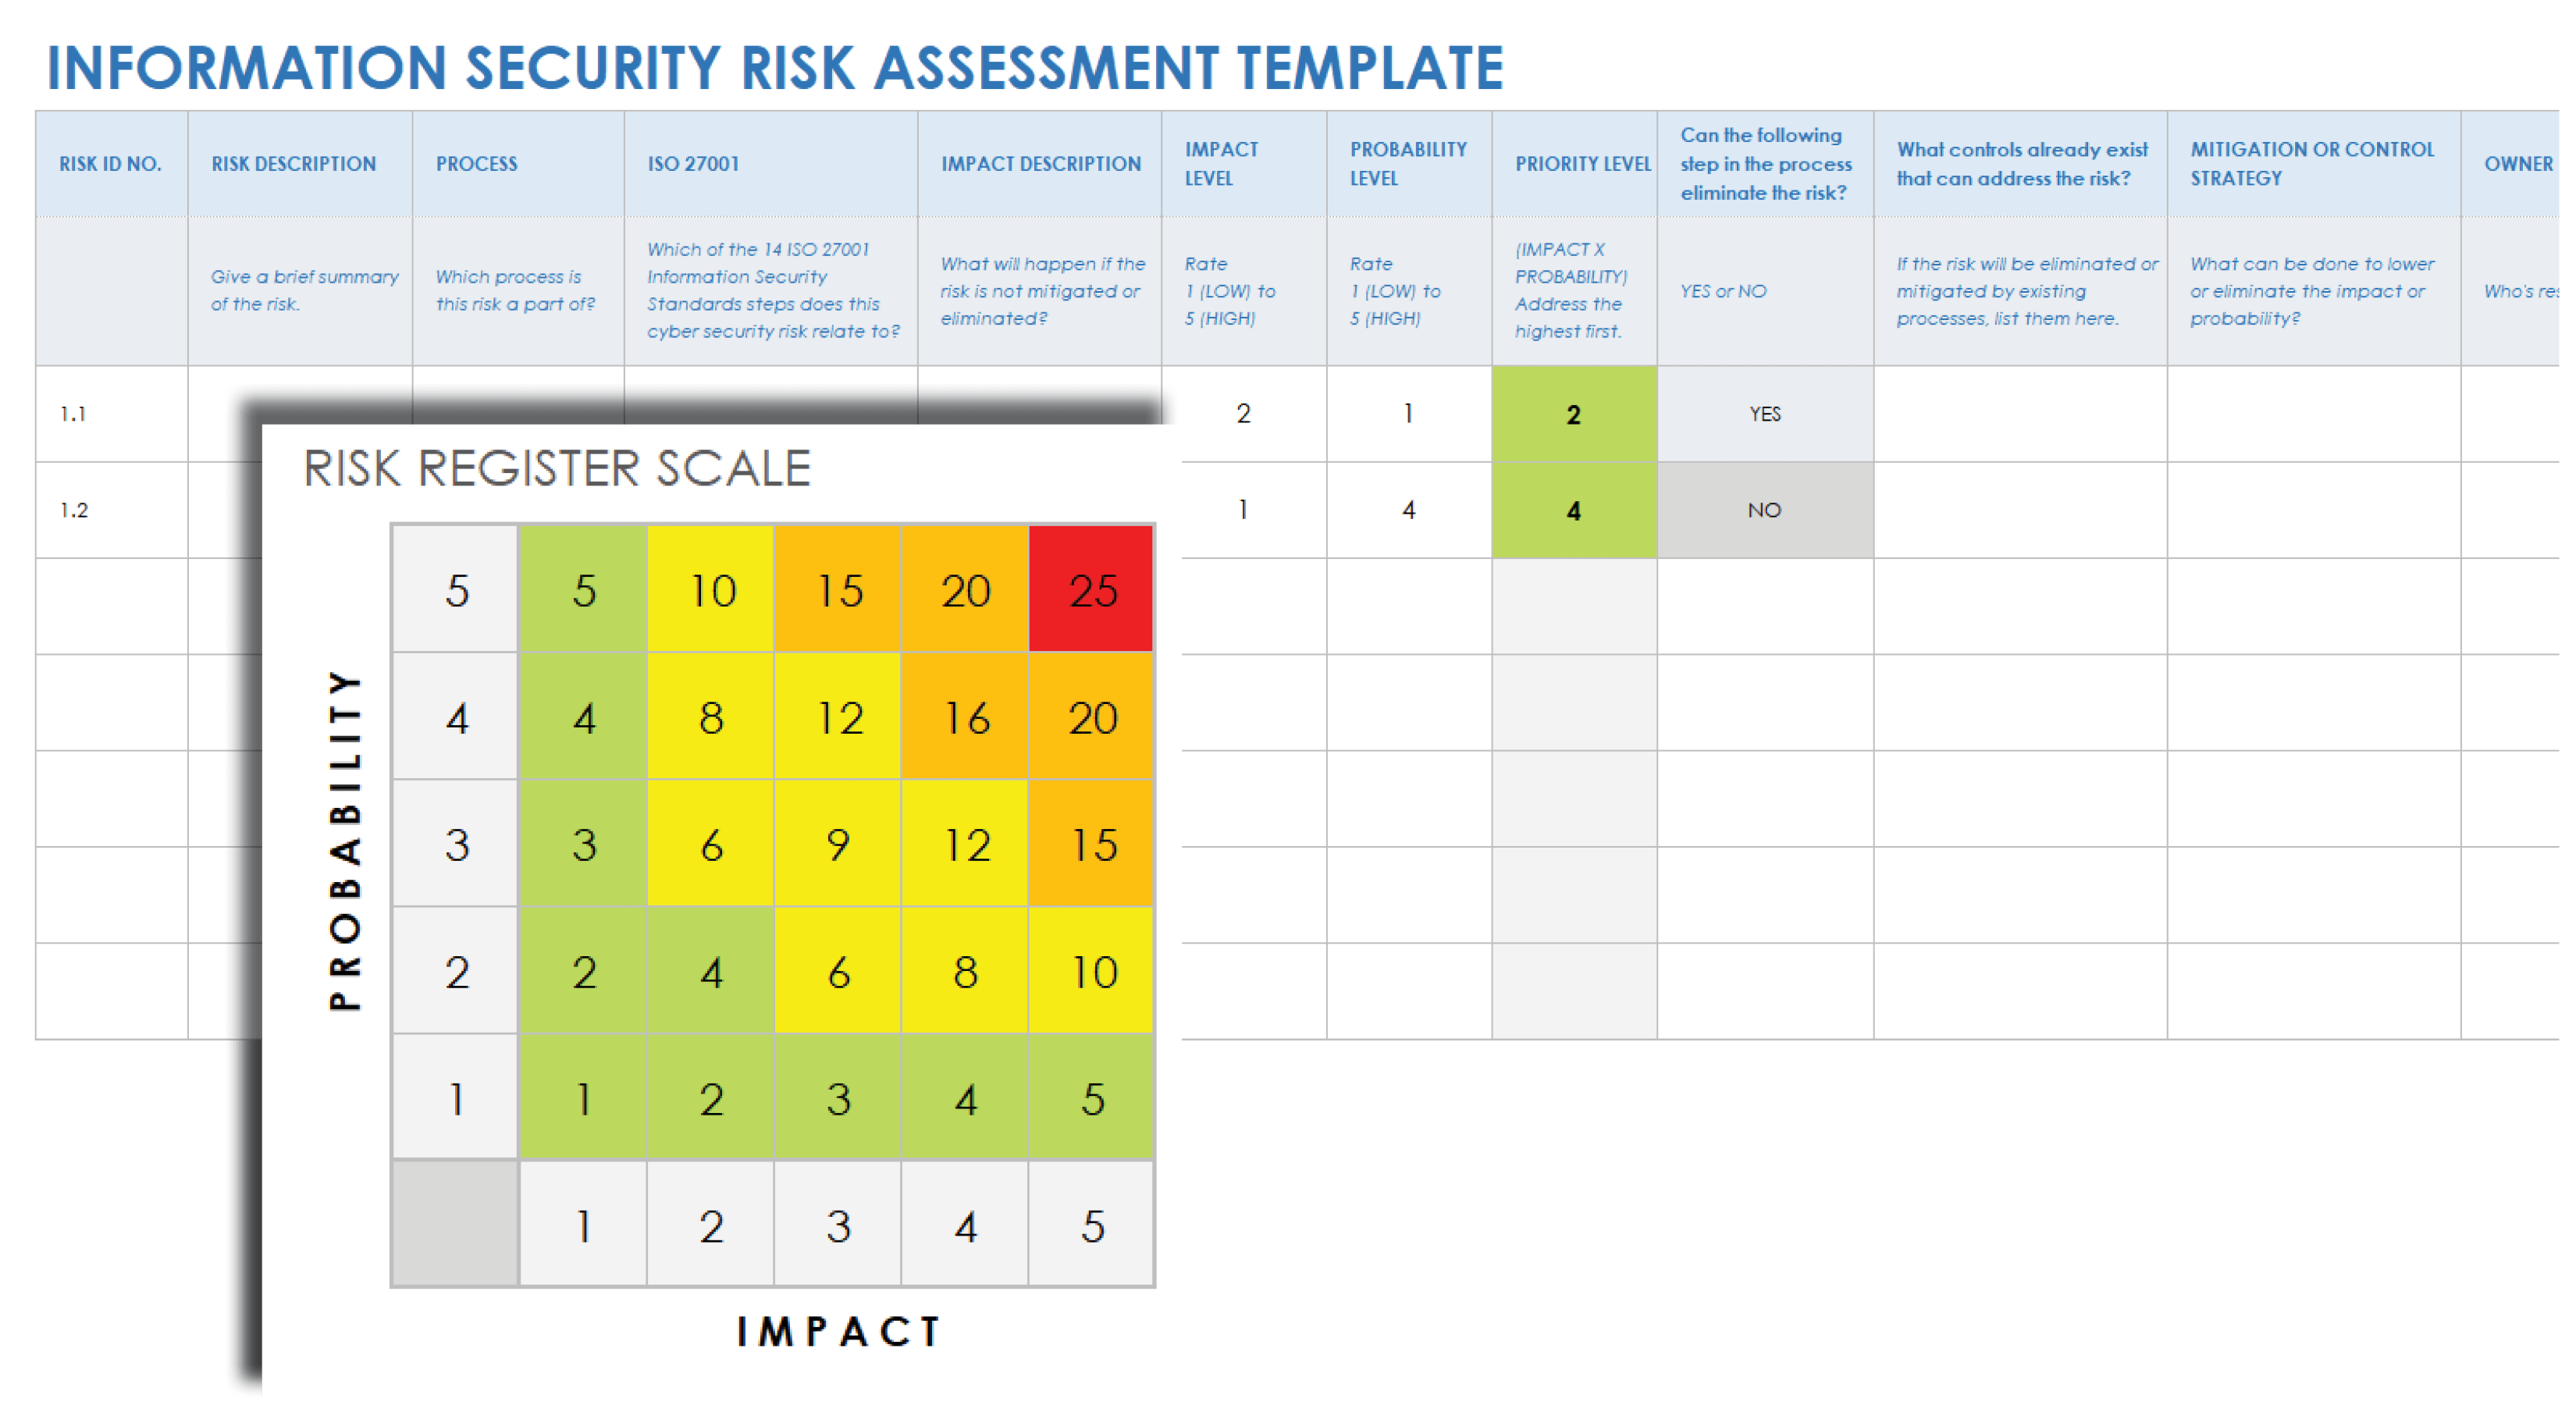 Free Cybersecurity Risk Assessment Templates Smartsheet